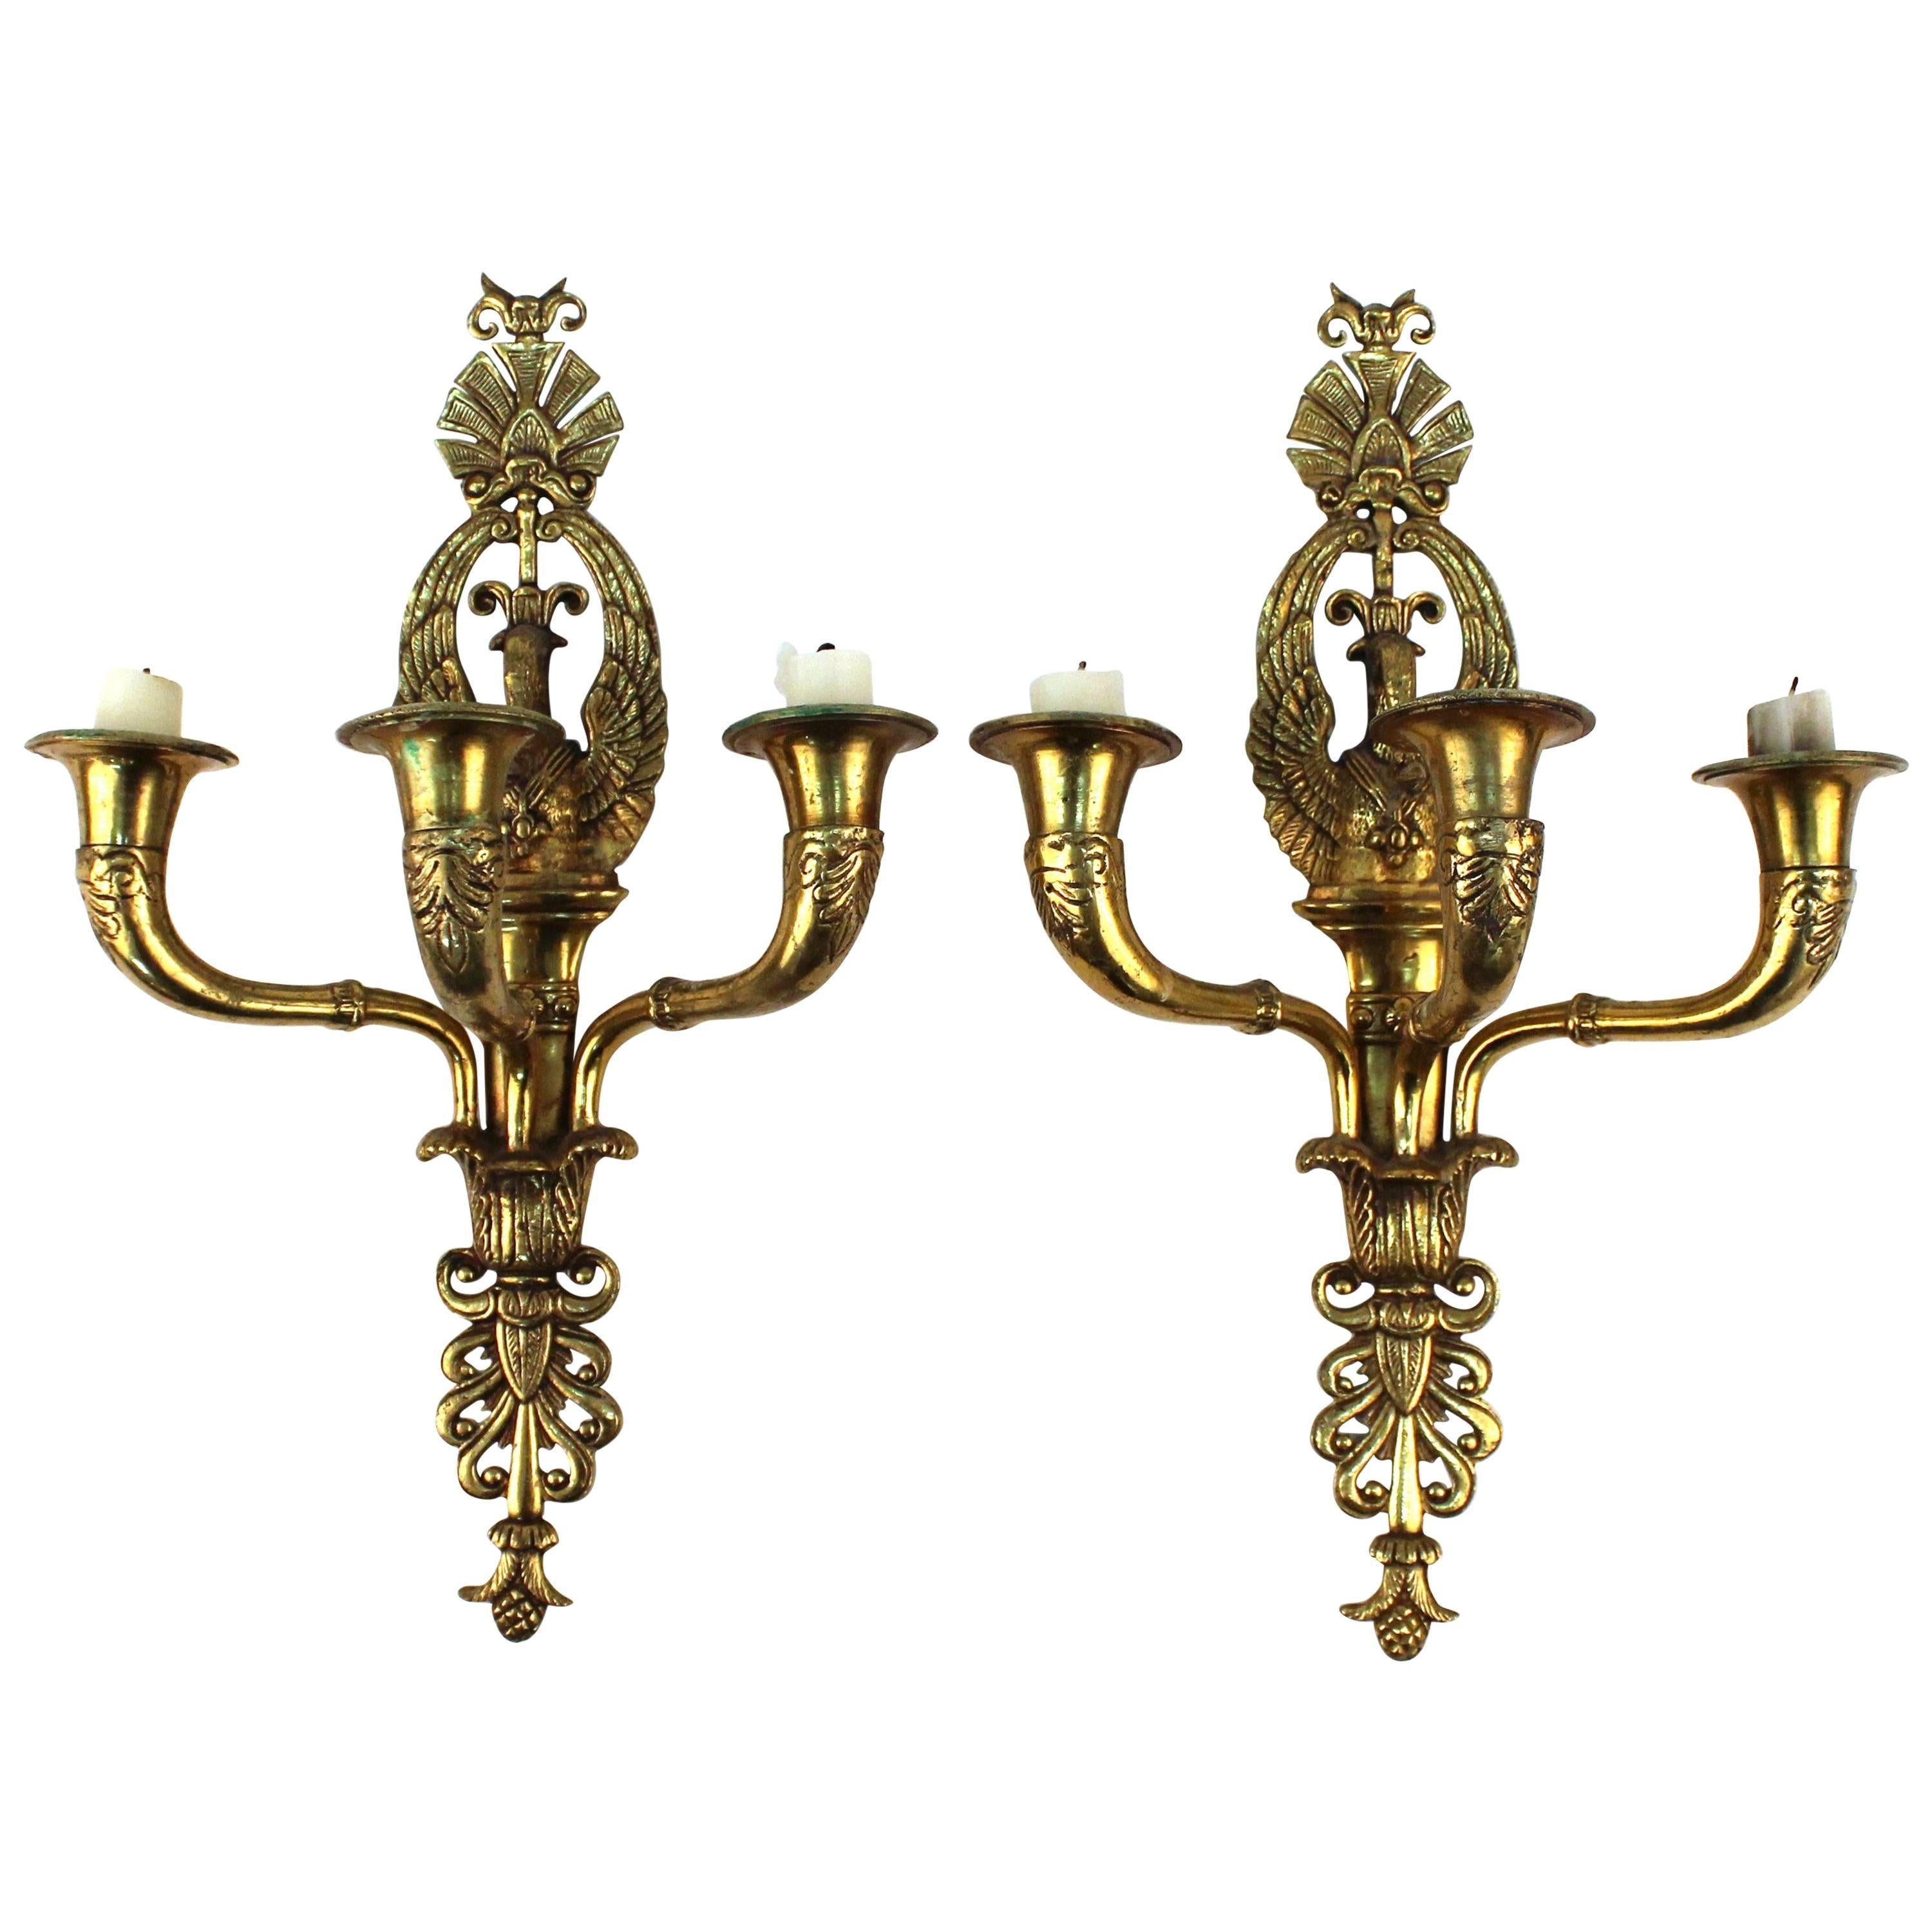 Pair of 19th Century French Empire Swan Sconces